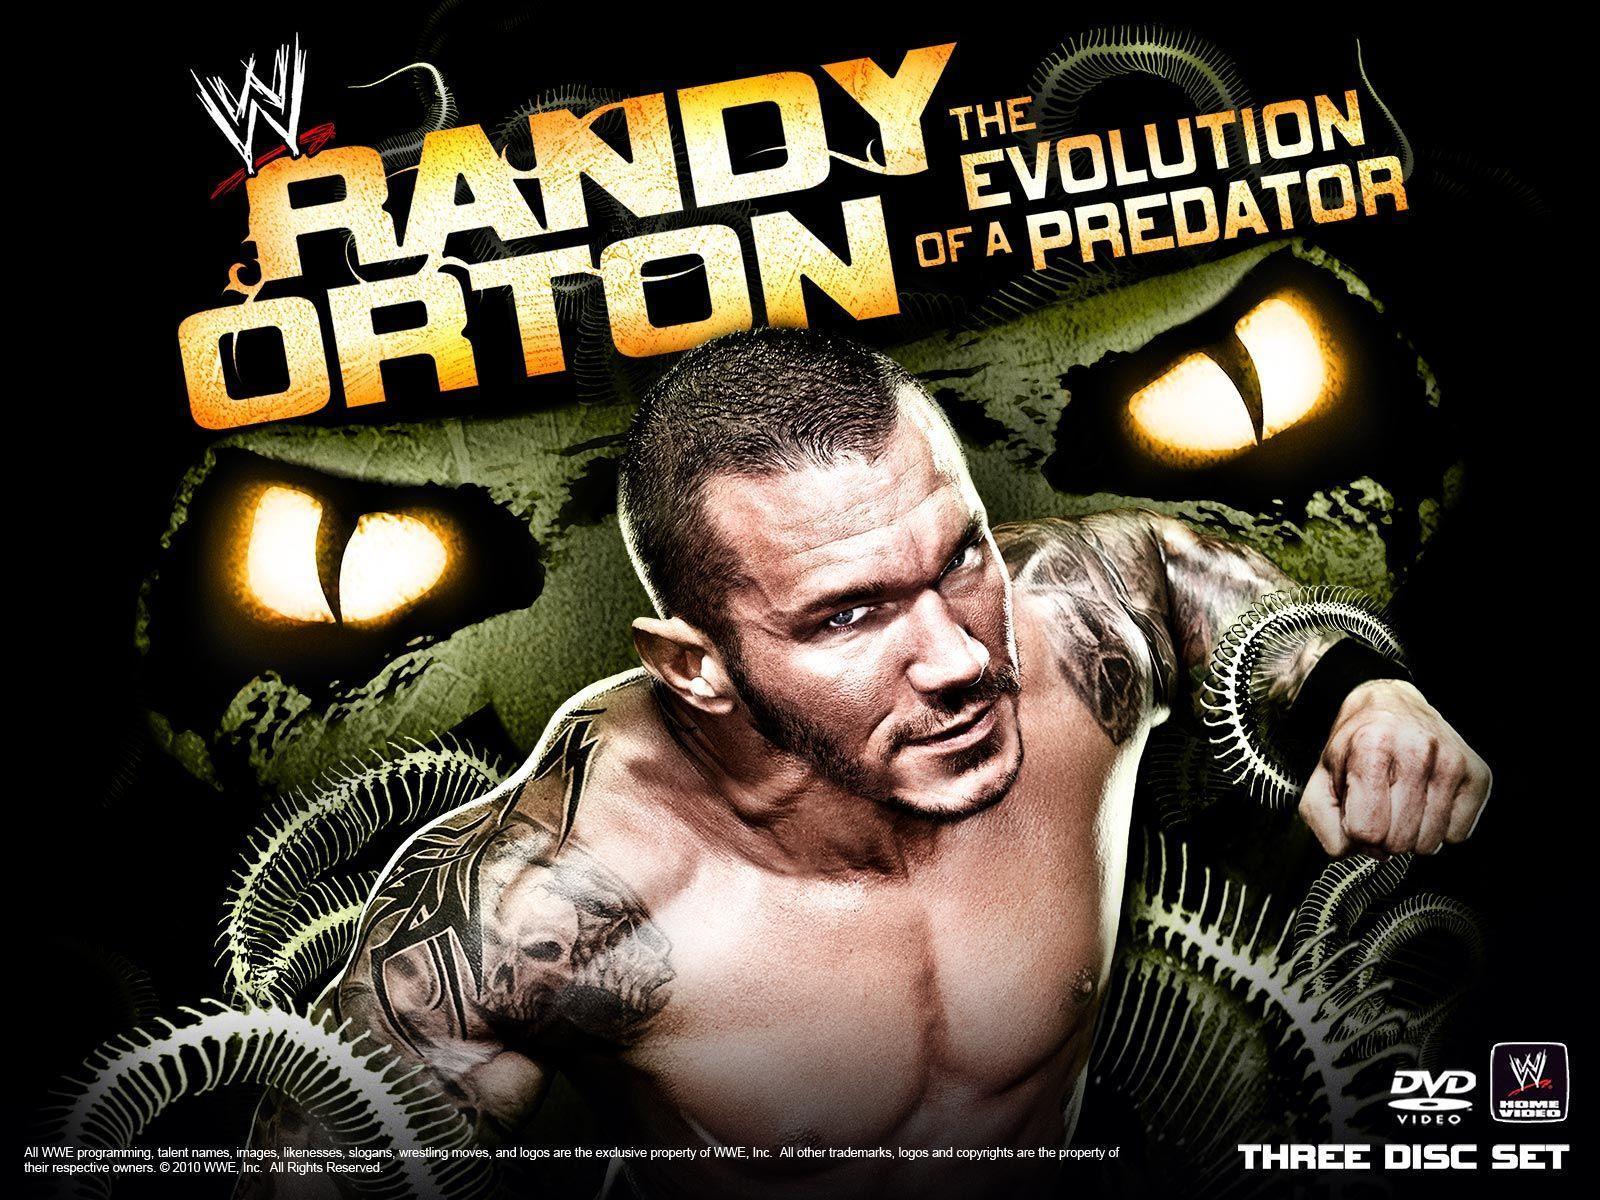 WWE Releases Wallpapers of Randy Orton: Evolution of a Predator DVD.